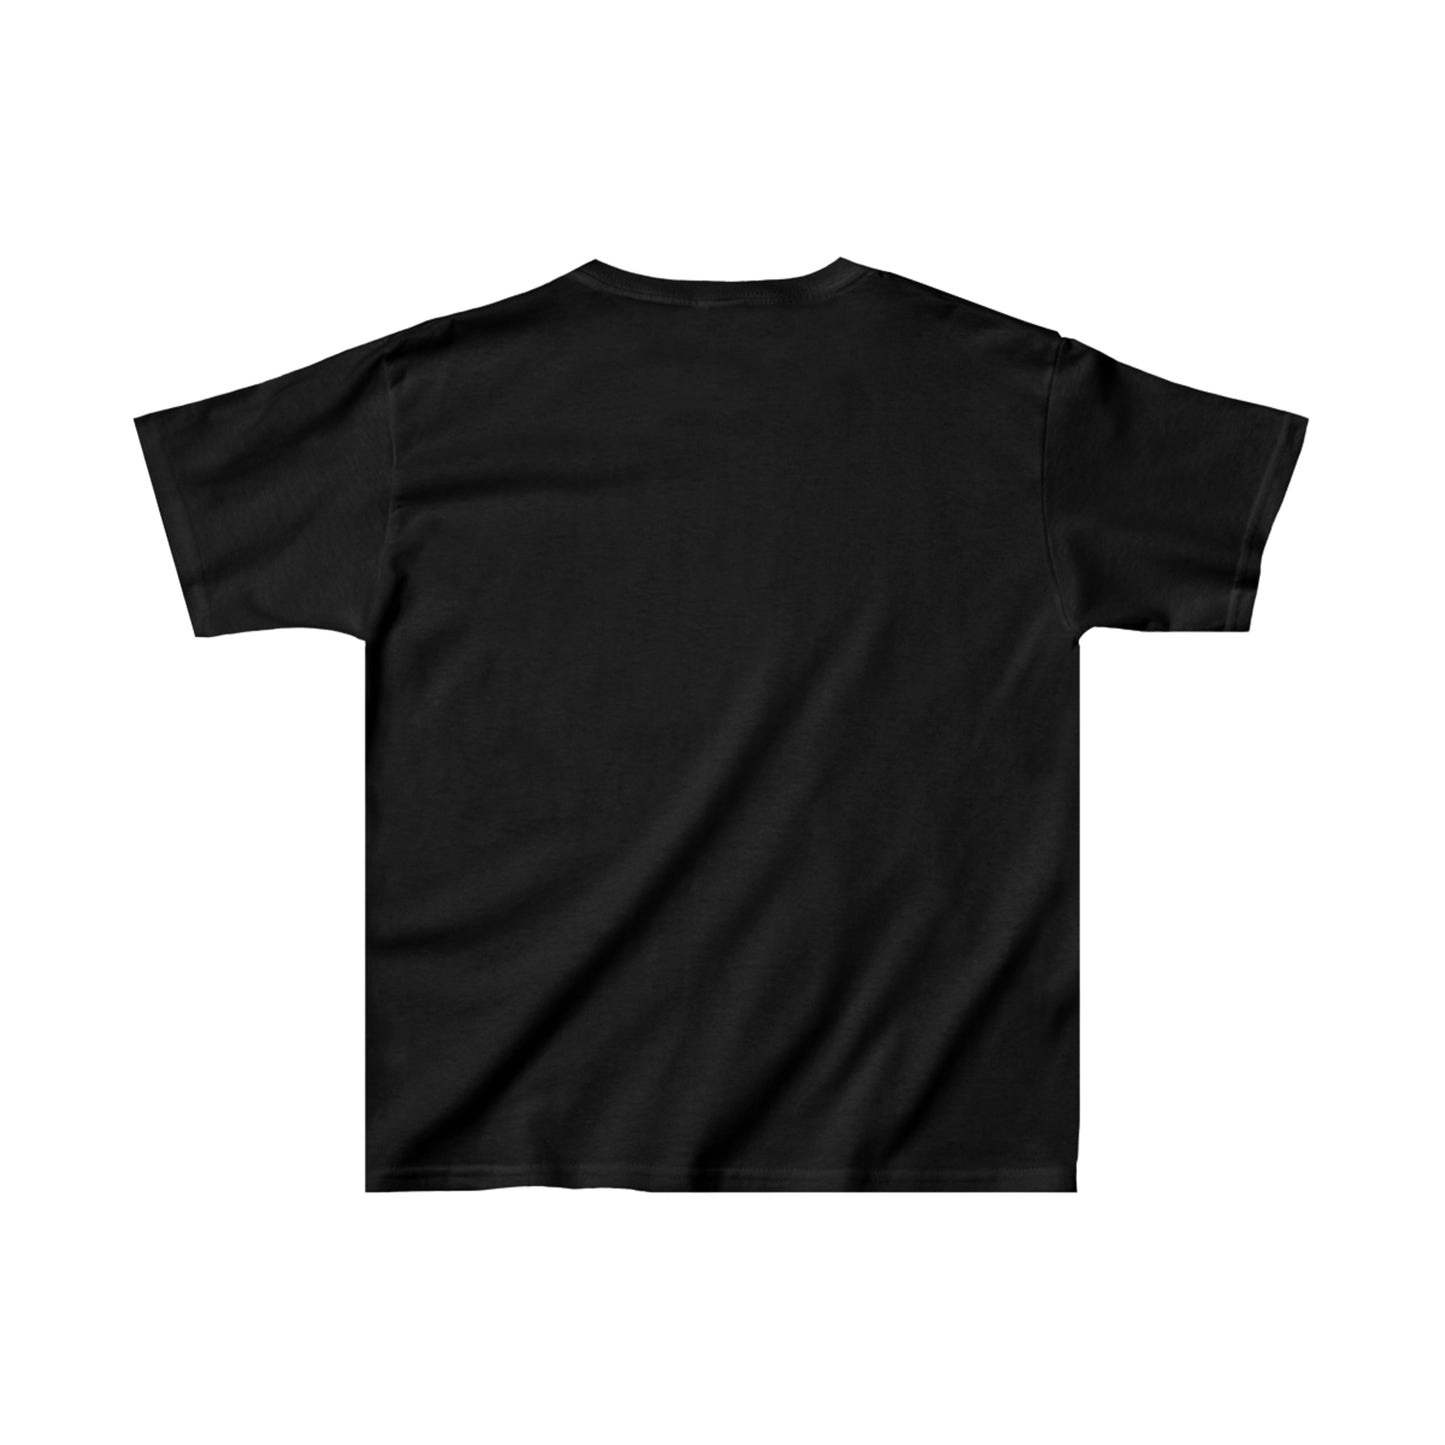 Ain't New to This - YOUTH T-Shirt